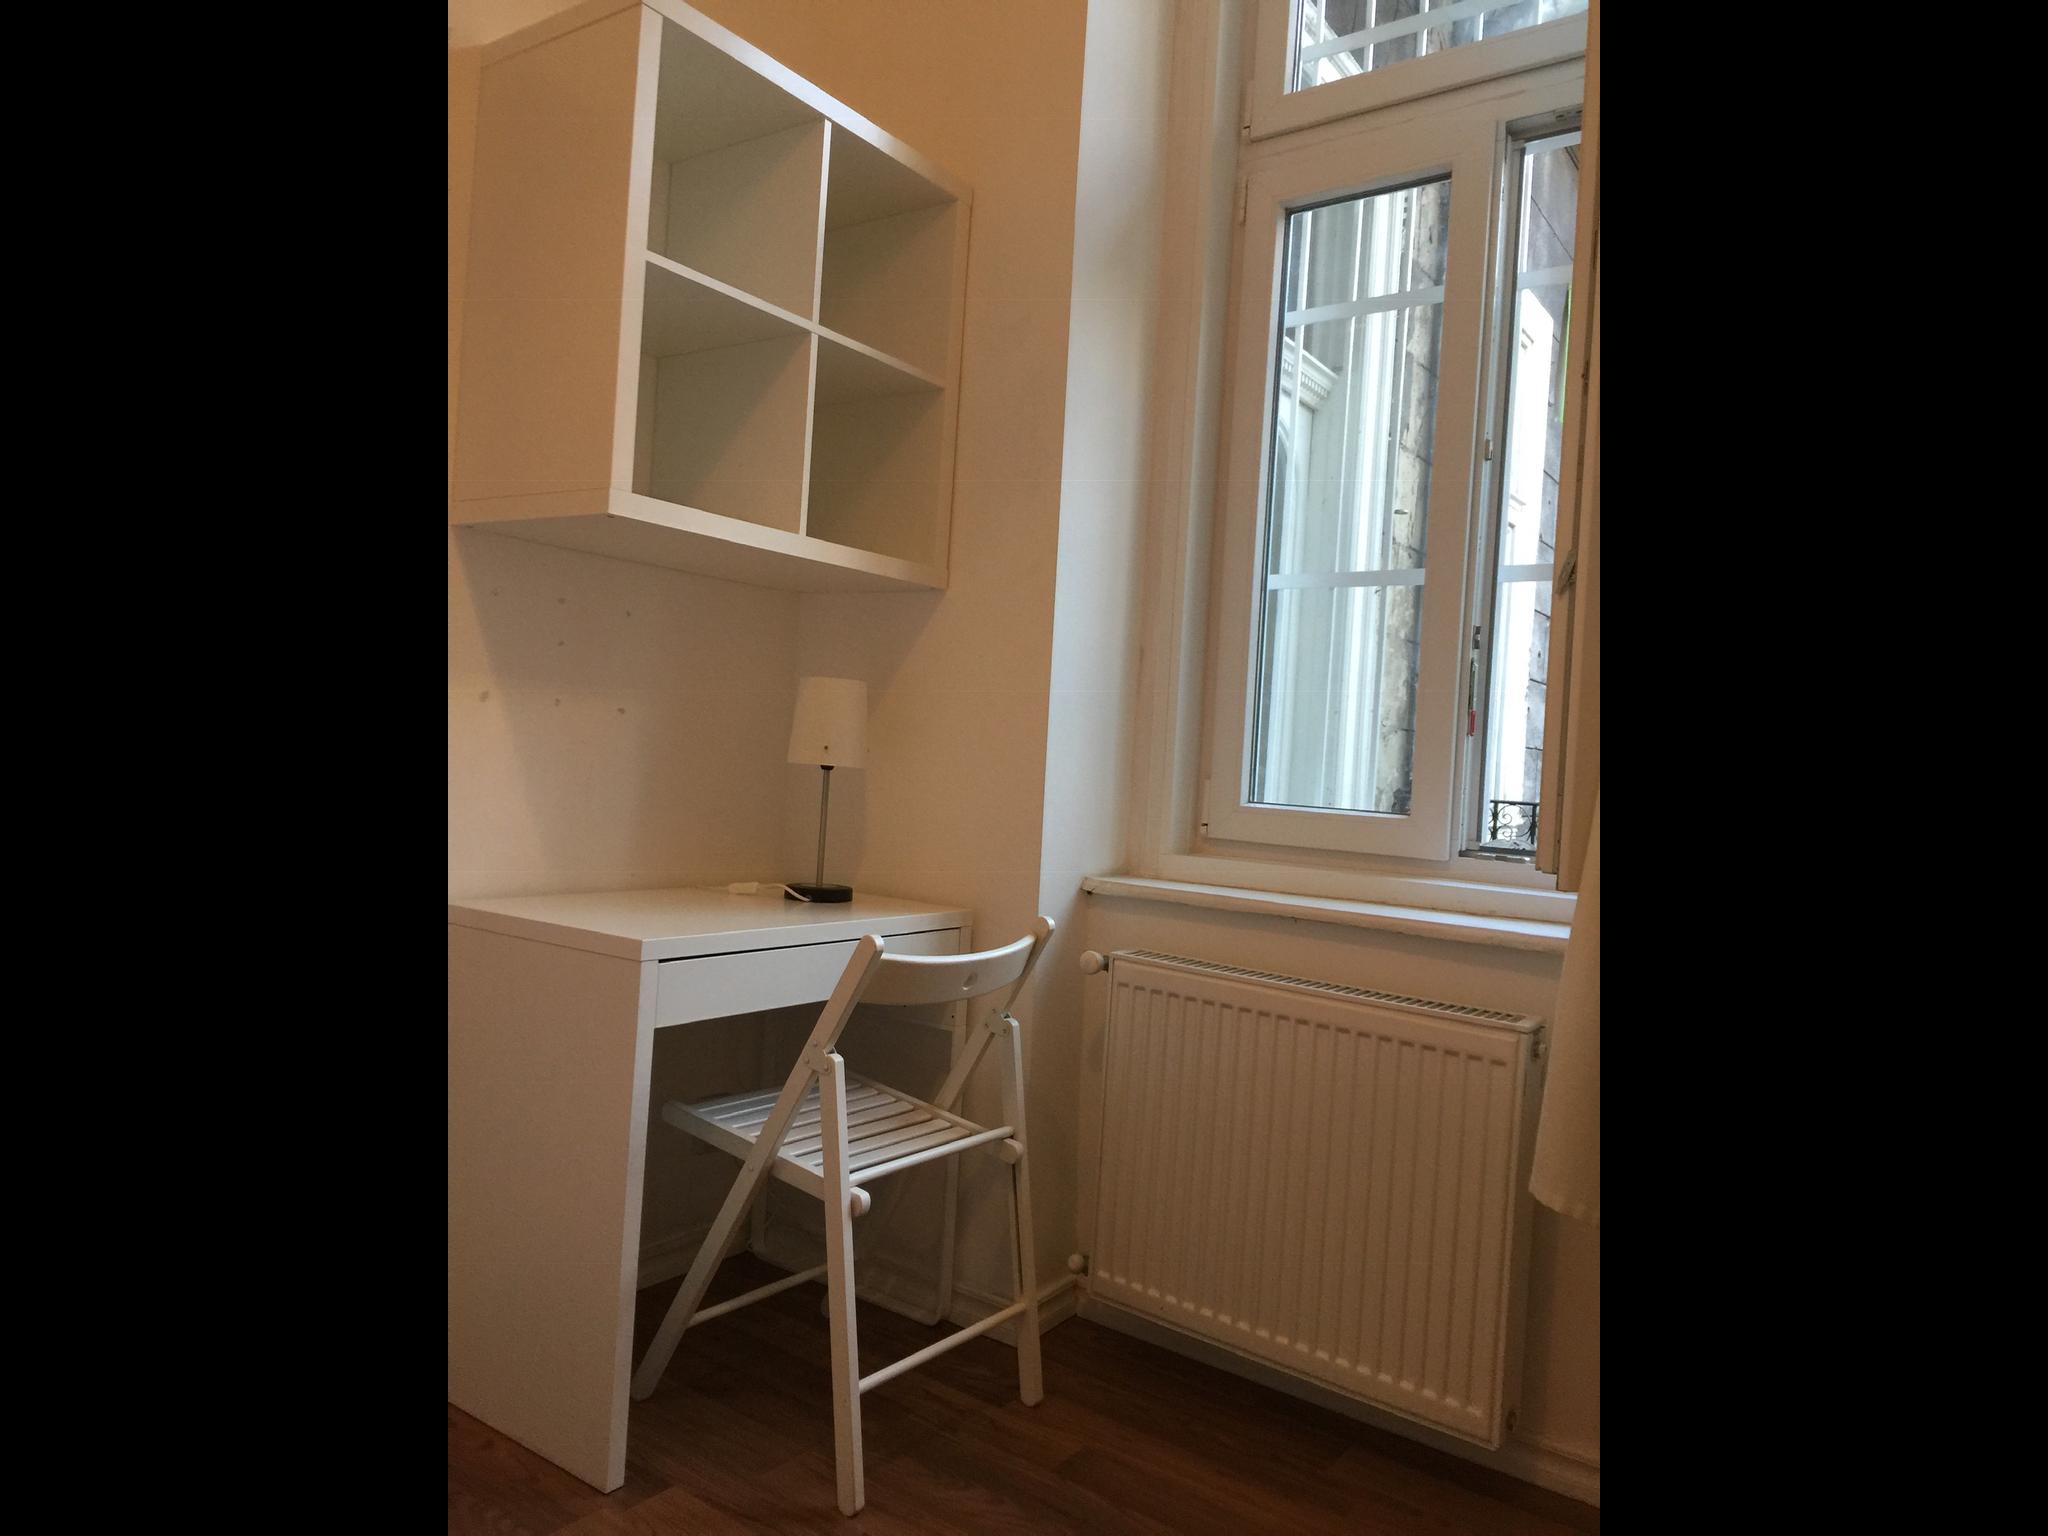 Zichy - Bedroom in renovated flat Budapest